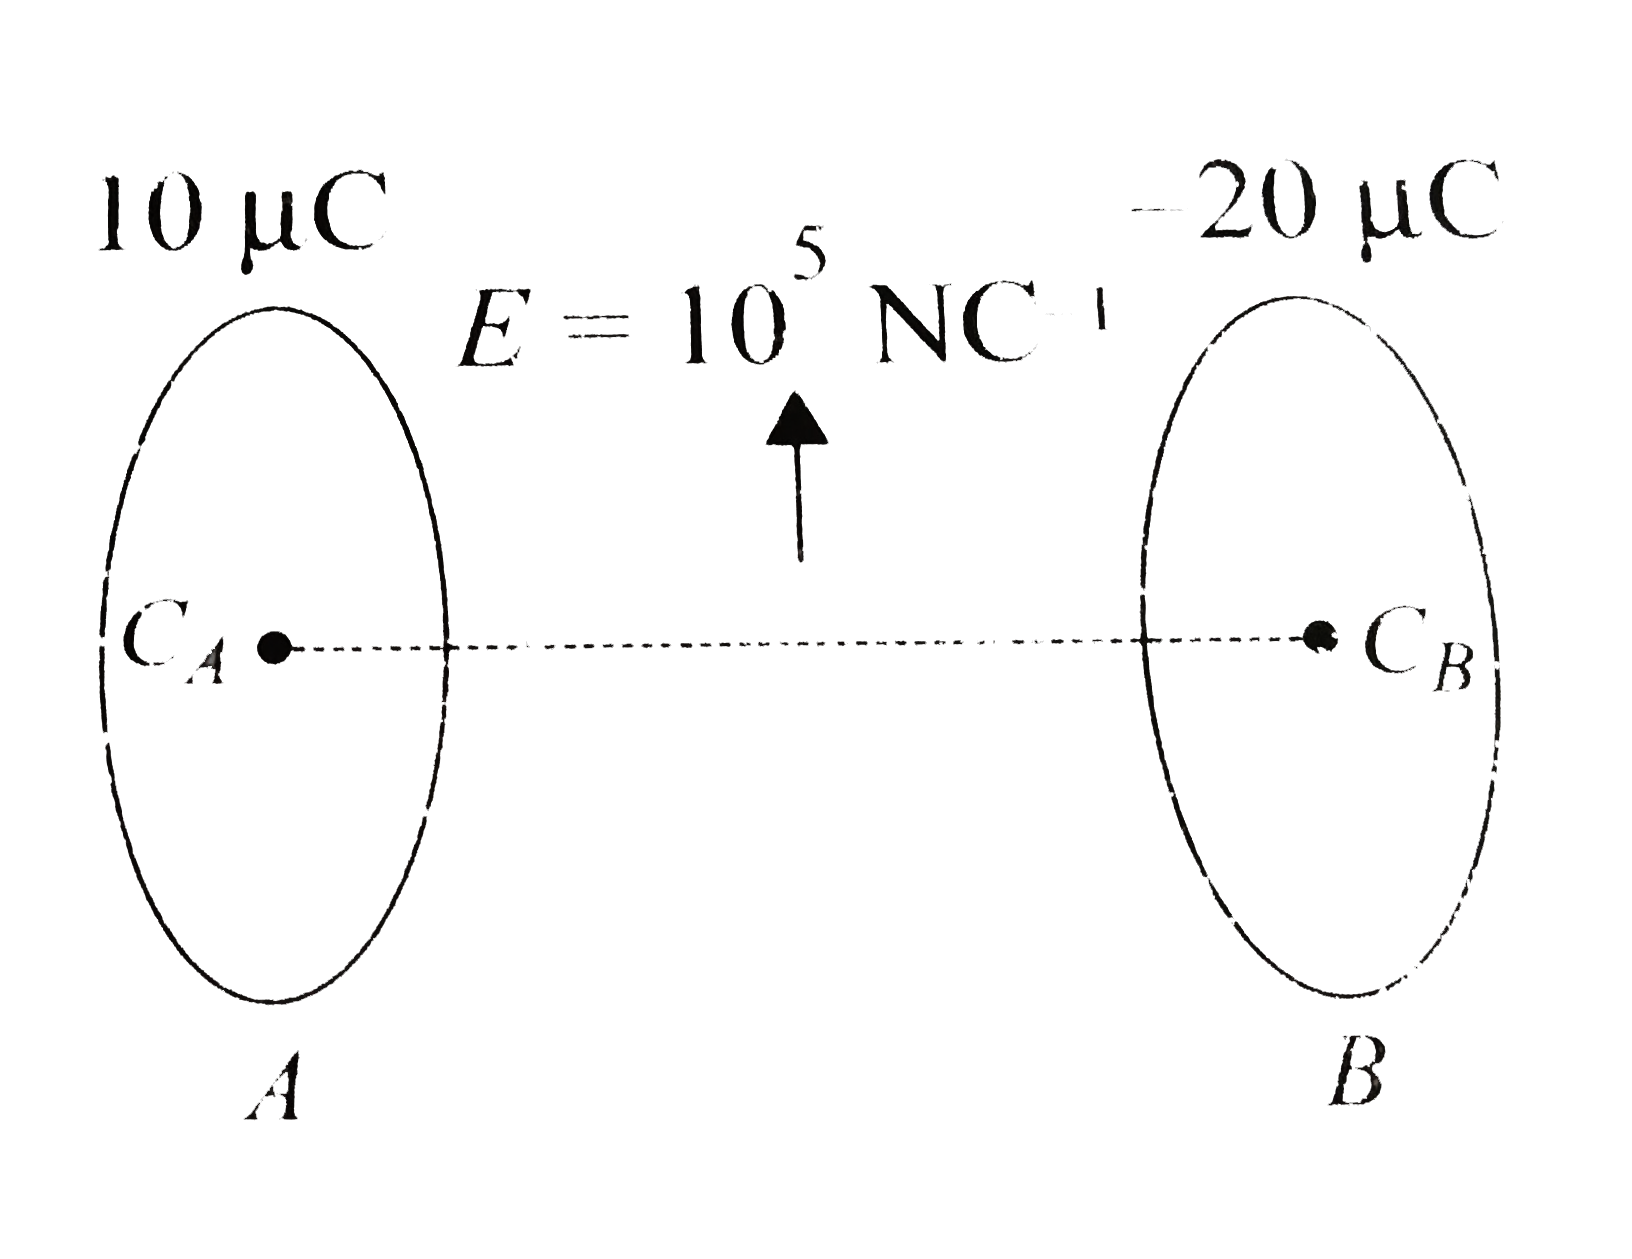 Two circular rings A and B each of radius a = 30 cm are placed coaxially with their axis horizontal in a uniform electric field E = 10^(5) NC^(-1)  directed vertically upward as shown in figure. Distance between centers of the rings A and B (CA and CB)is 40 cm. Ring A has positive charge qA = 10muC  and B has a negative charge qB = -20muC. A particle of mass m and charge q = 10muC is released from rest at the center of ring A. If particle moves along CACB, then      Work done by electric field, when particle moves from CA to CB is